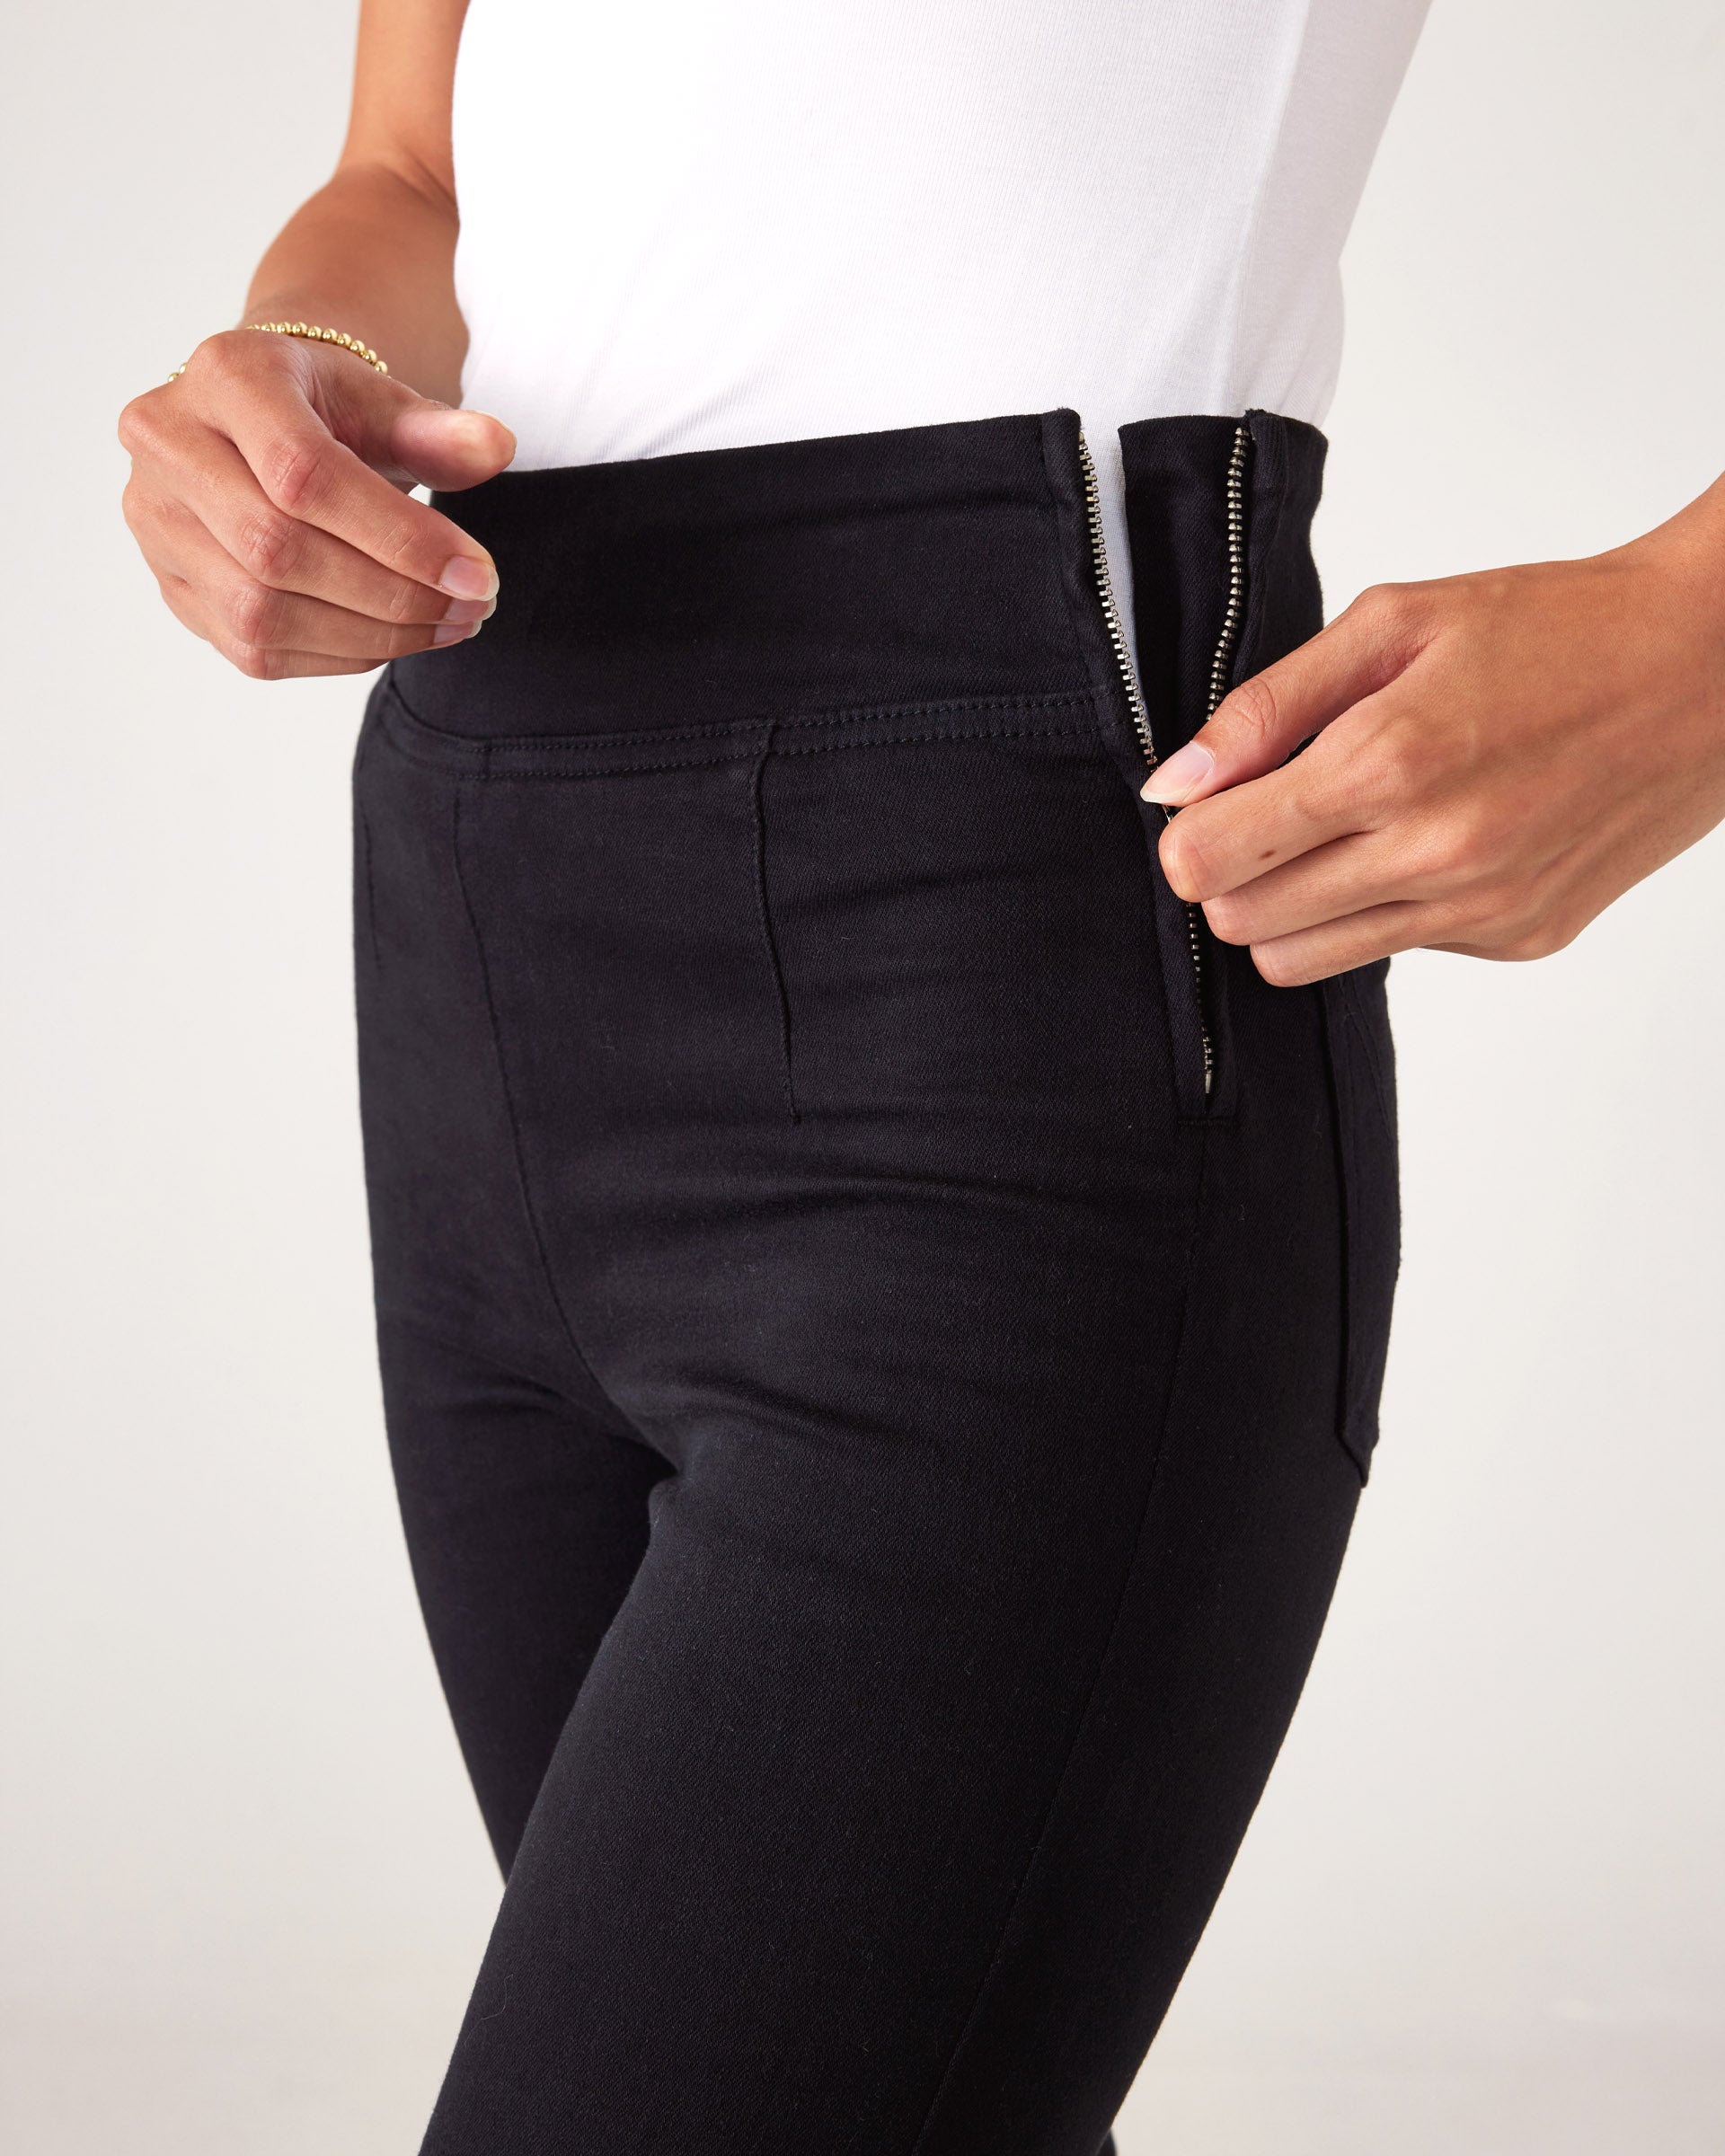 closeup view of side zipper on Woman wearing Mersea Nomad black denim full length boot-cut jeans against a white background